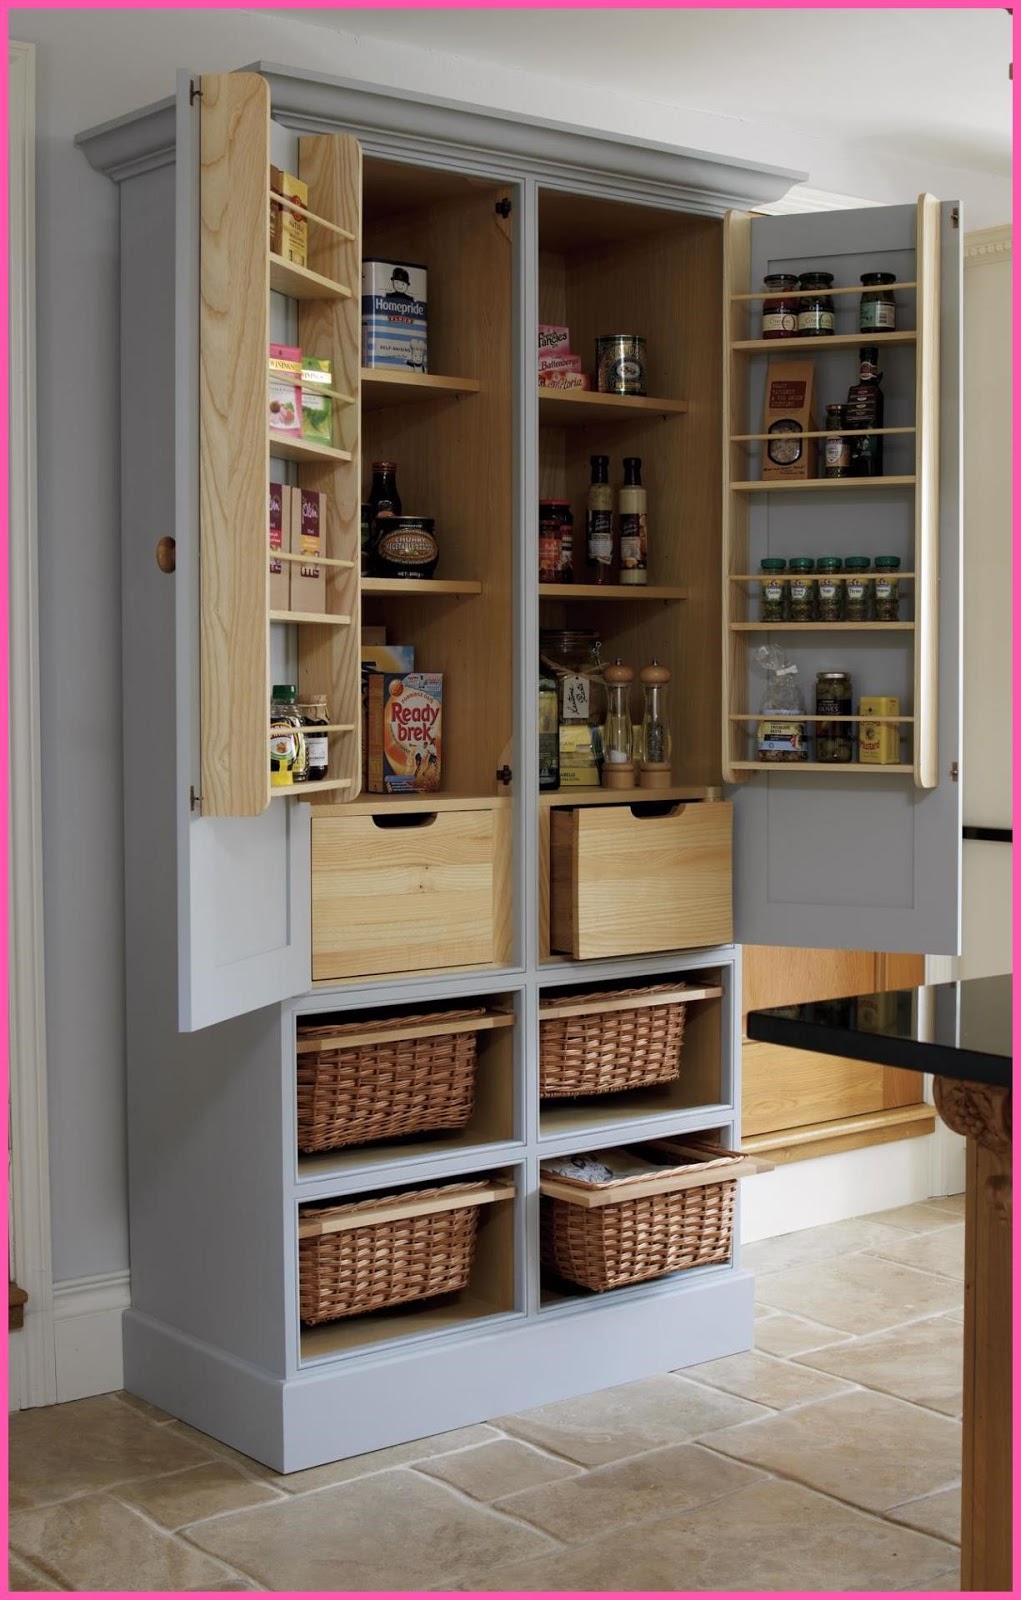 7 Stand Alone Kitchen Pantry Uk Free standing kitchen pantry You could make something like it  Kitchen,Pantry,Stand,Alone